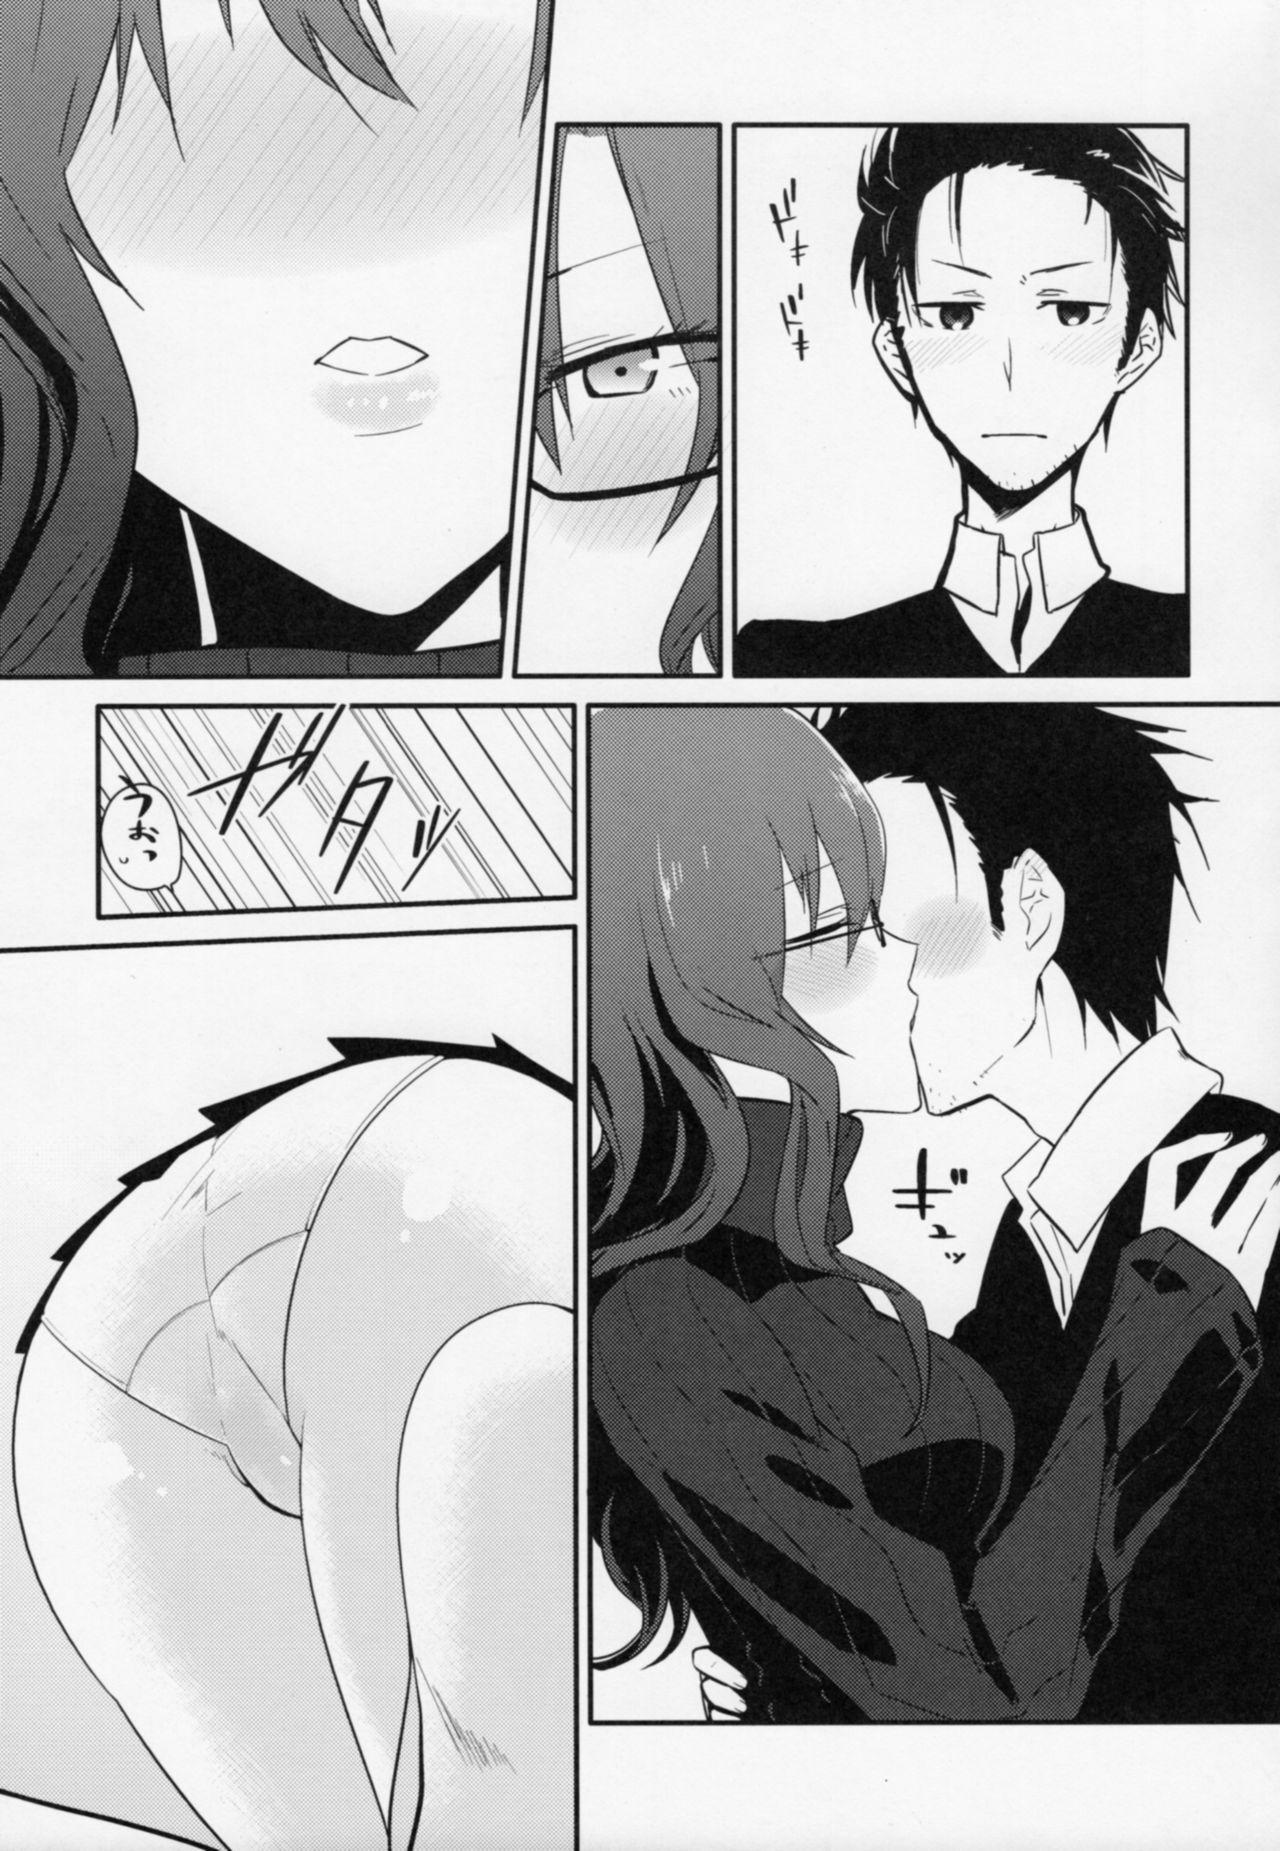 Blackmail Communication Syndrome - Steinsgate Macho - Page 9